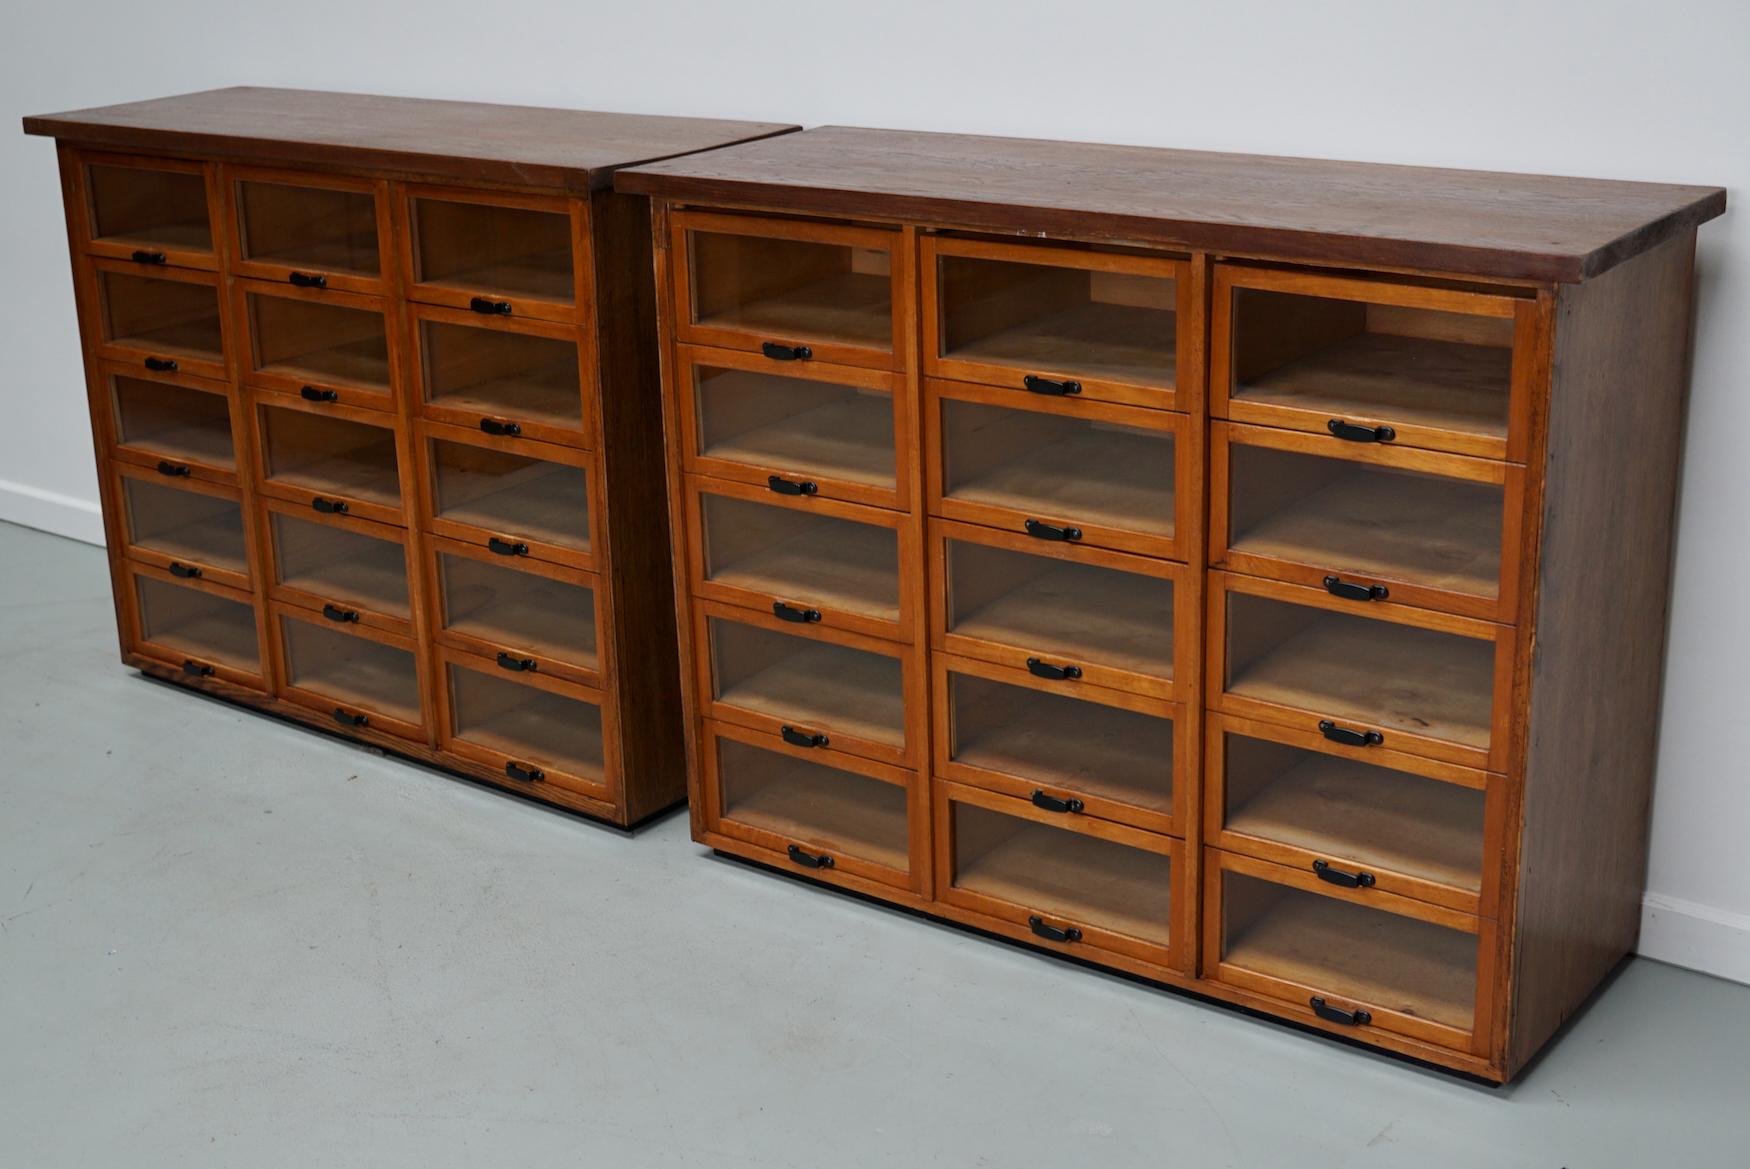 This haberdashery cabinet was produced during the 1950s in the Netherlands. It features 15 drawers in beech with glass fronts and metal handles. It was originally used in a warehouse for plant seeds in the city of Delft. The interior dimensions of